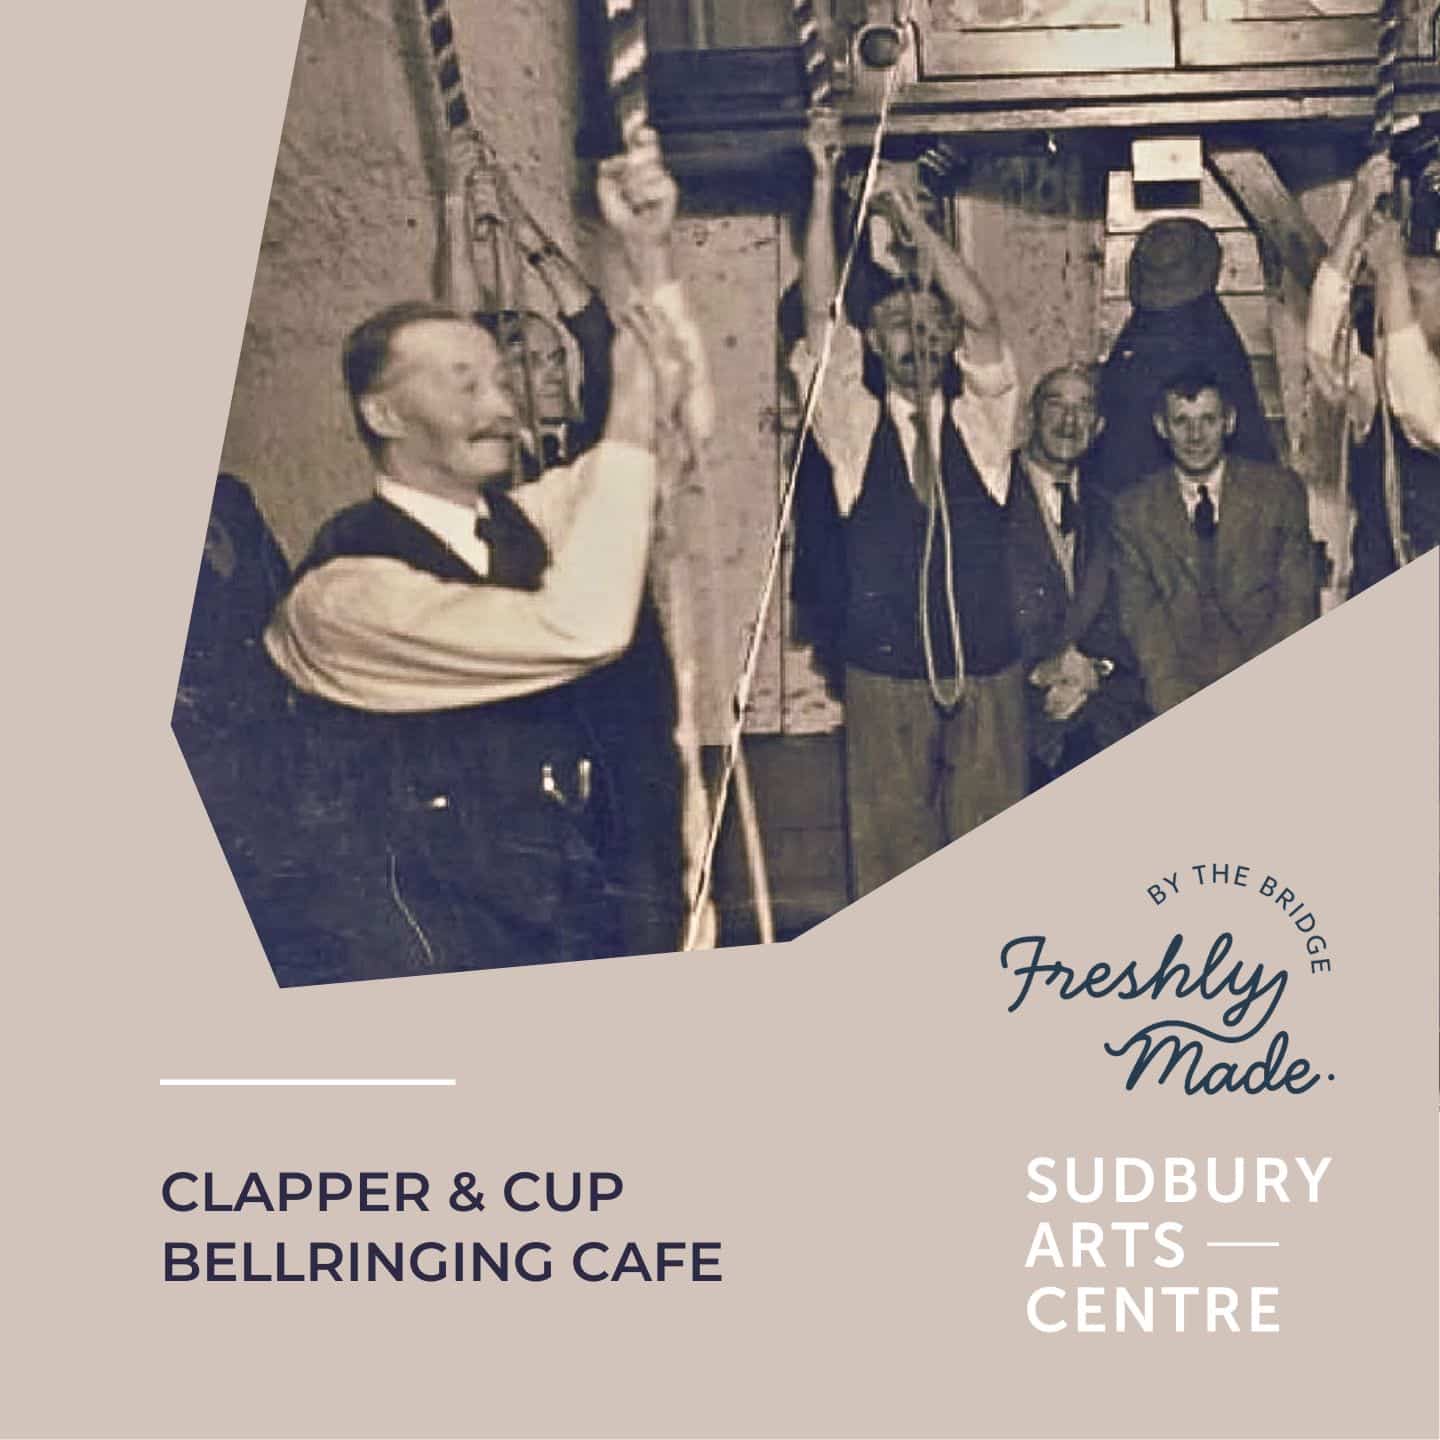 Clapper & Cup Bellringing Cafe - Free to try